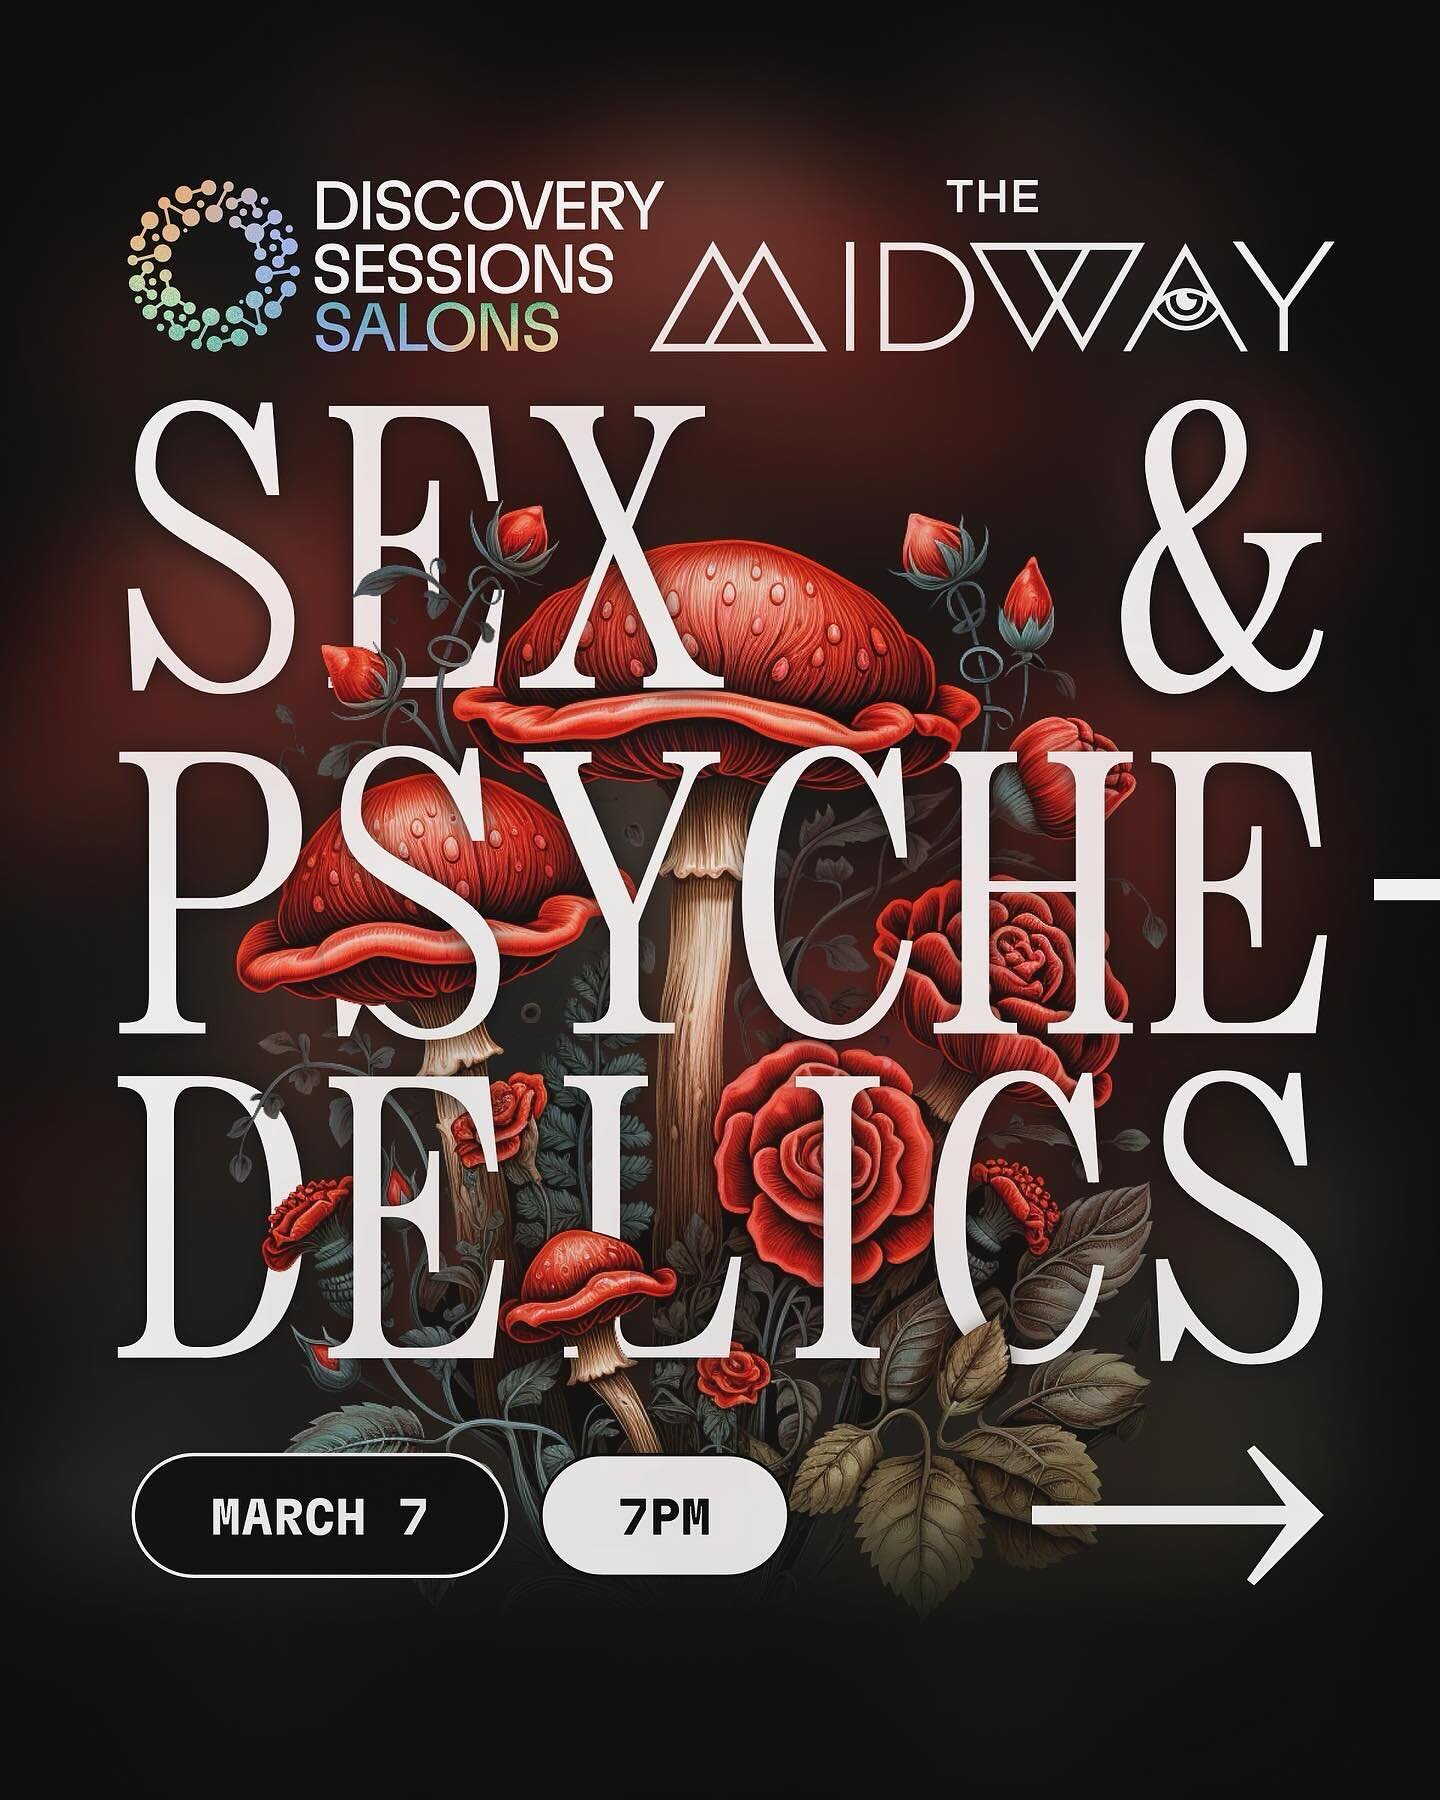 Peace and Blessings, loved ones! We&rsquo;re honored to sponsor the upcoming salon with @discoverysessionssf Sex and Psychedelics - located @themidwaysf This going to be one you won&rsquo;t want to miss. Tix are just $20 (link in my bio) pull up and 